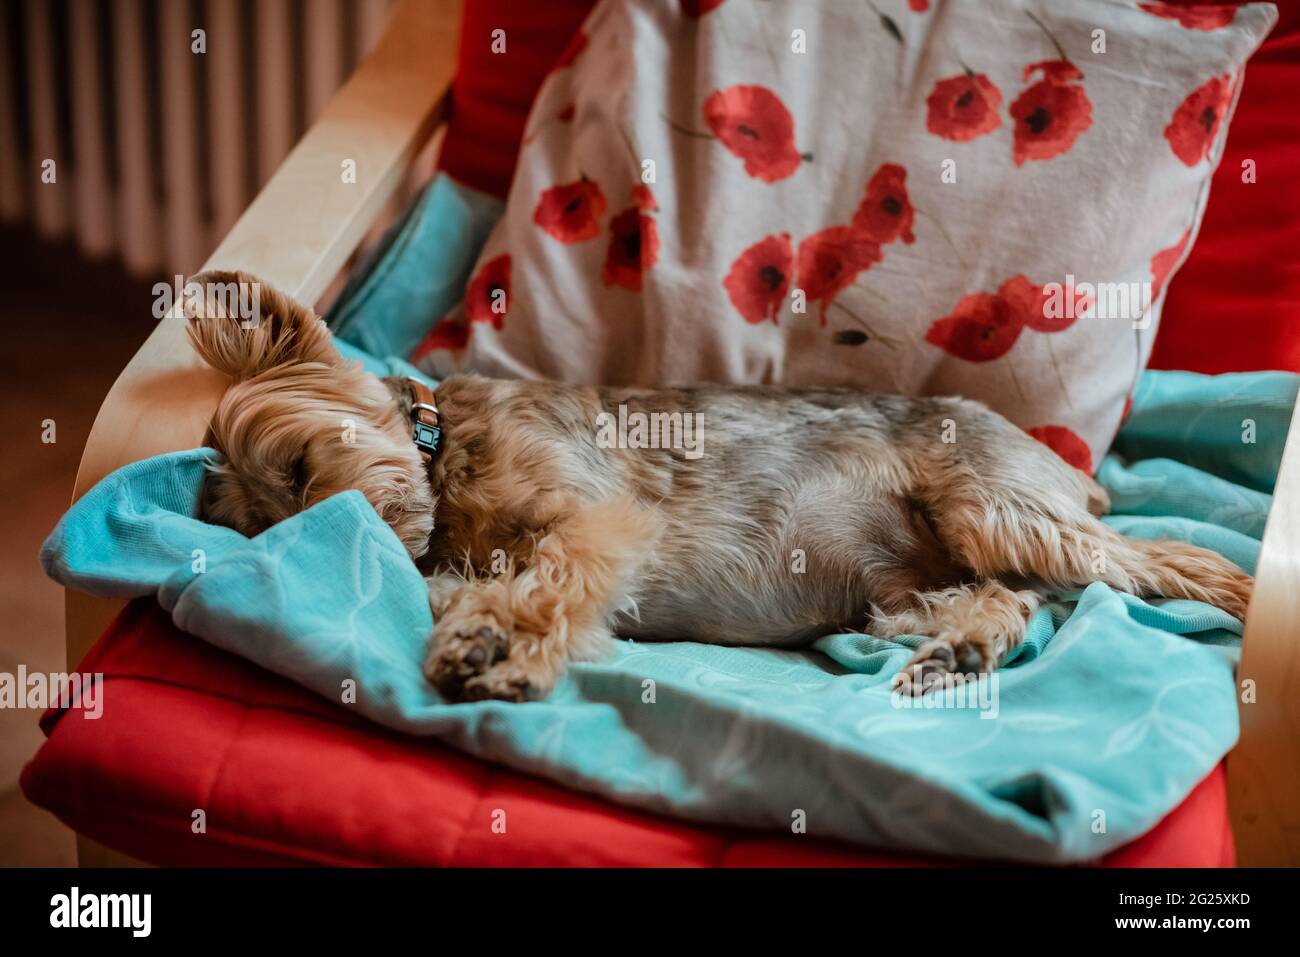 Yorkshire terrier sleeps on chair with colorful throw Stock Photo